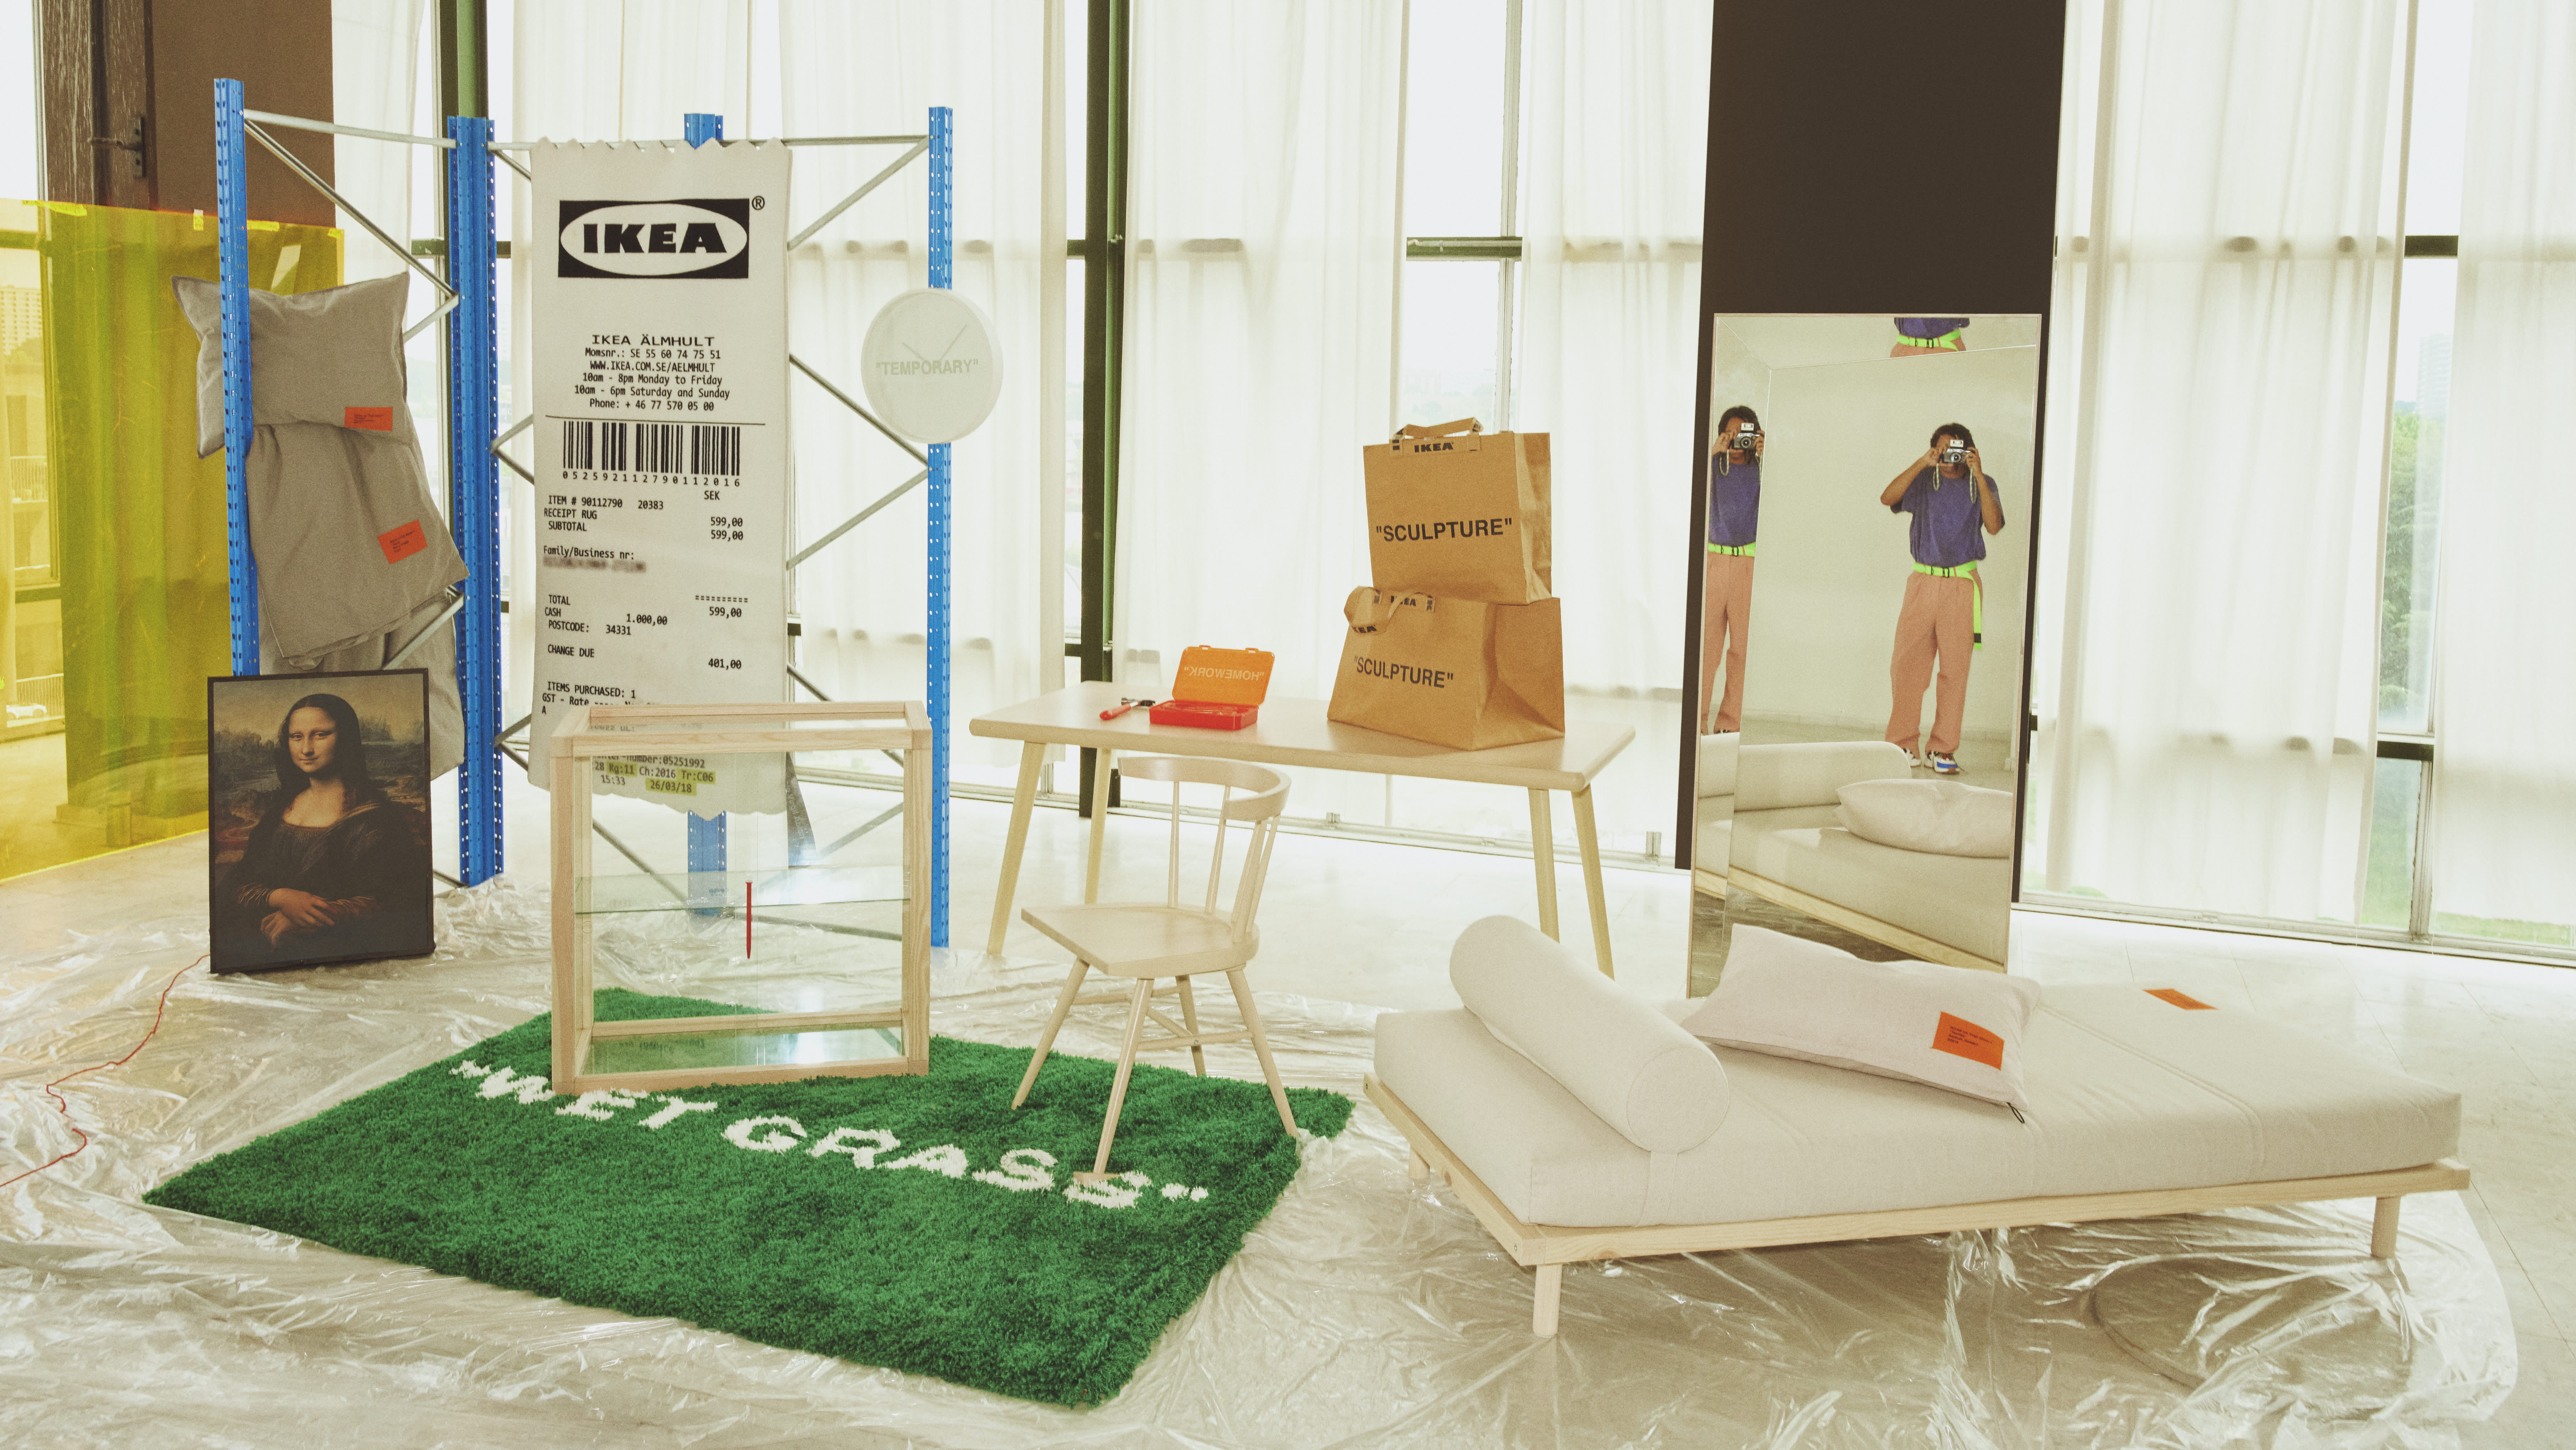 Pine Markerad display case by Virgil Abloh for IKEA